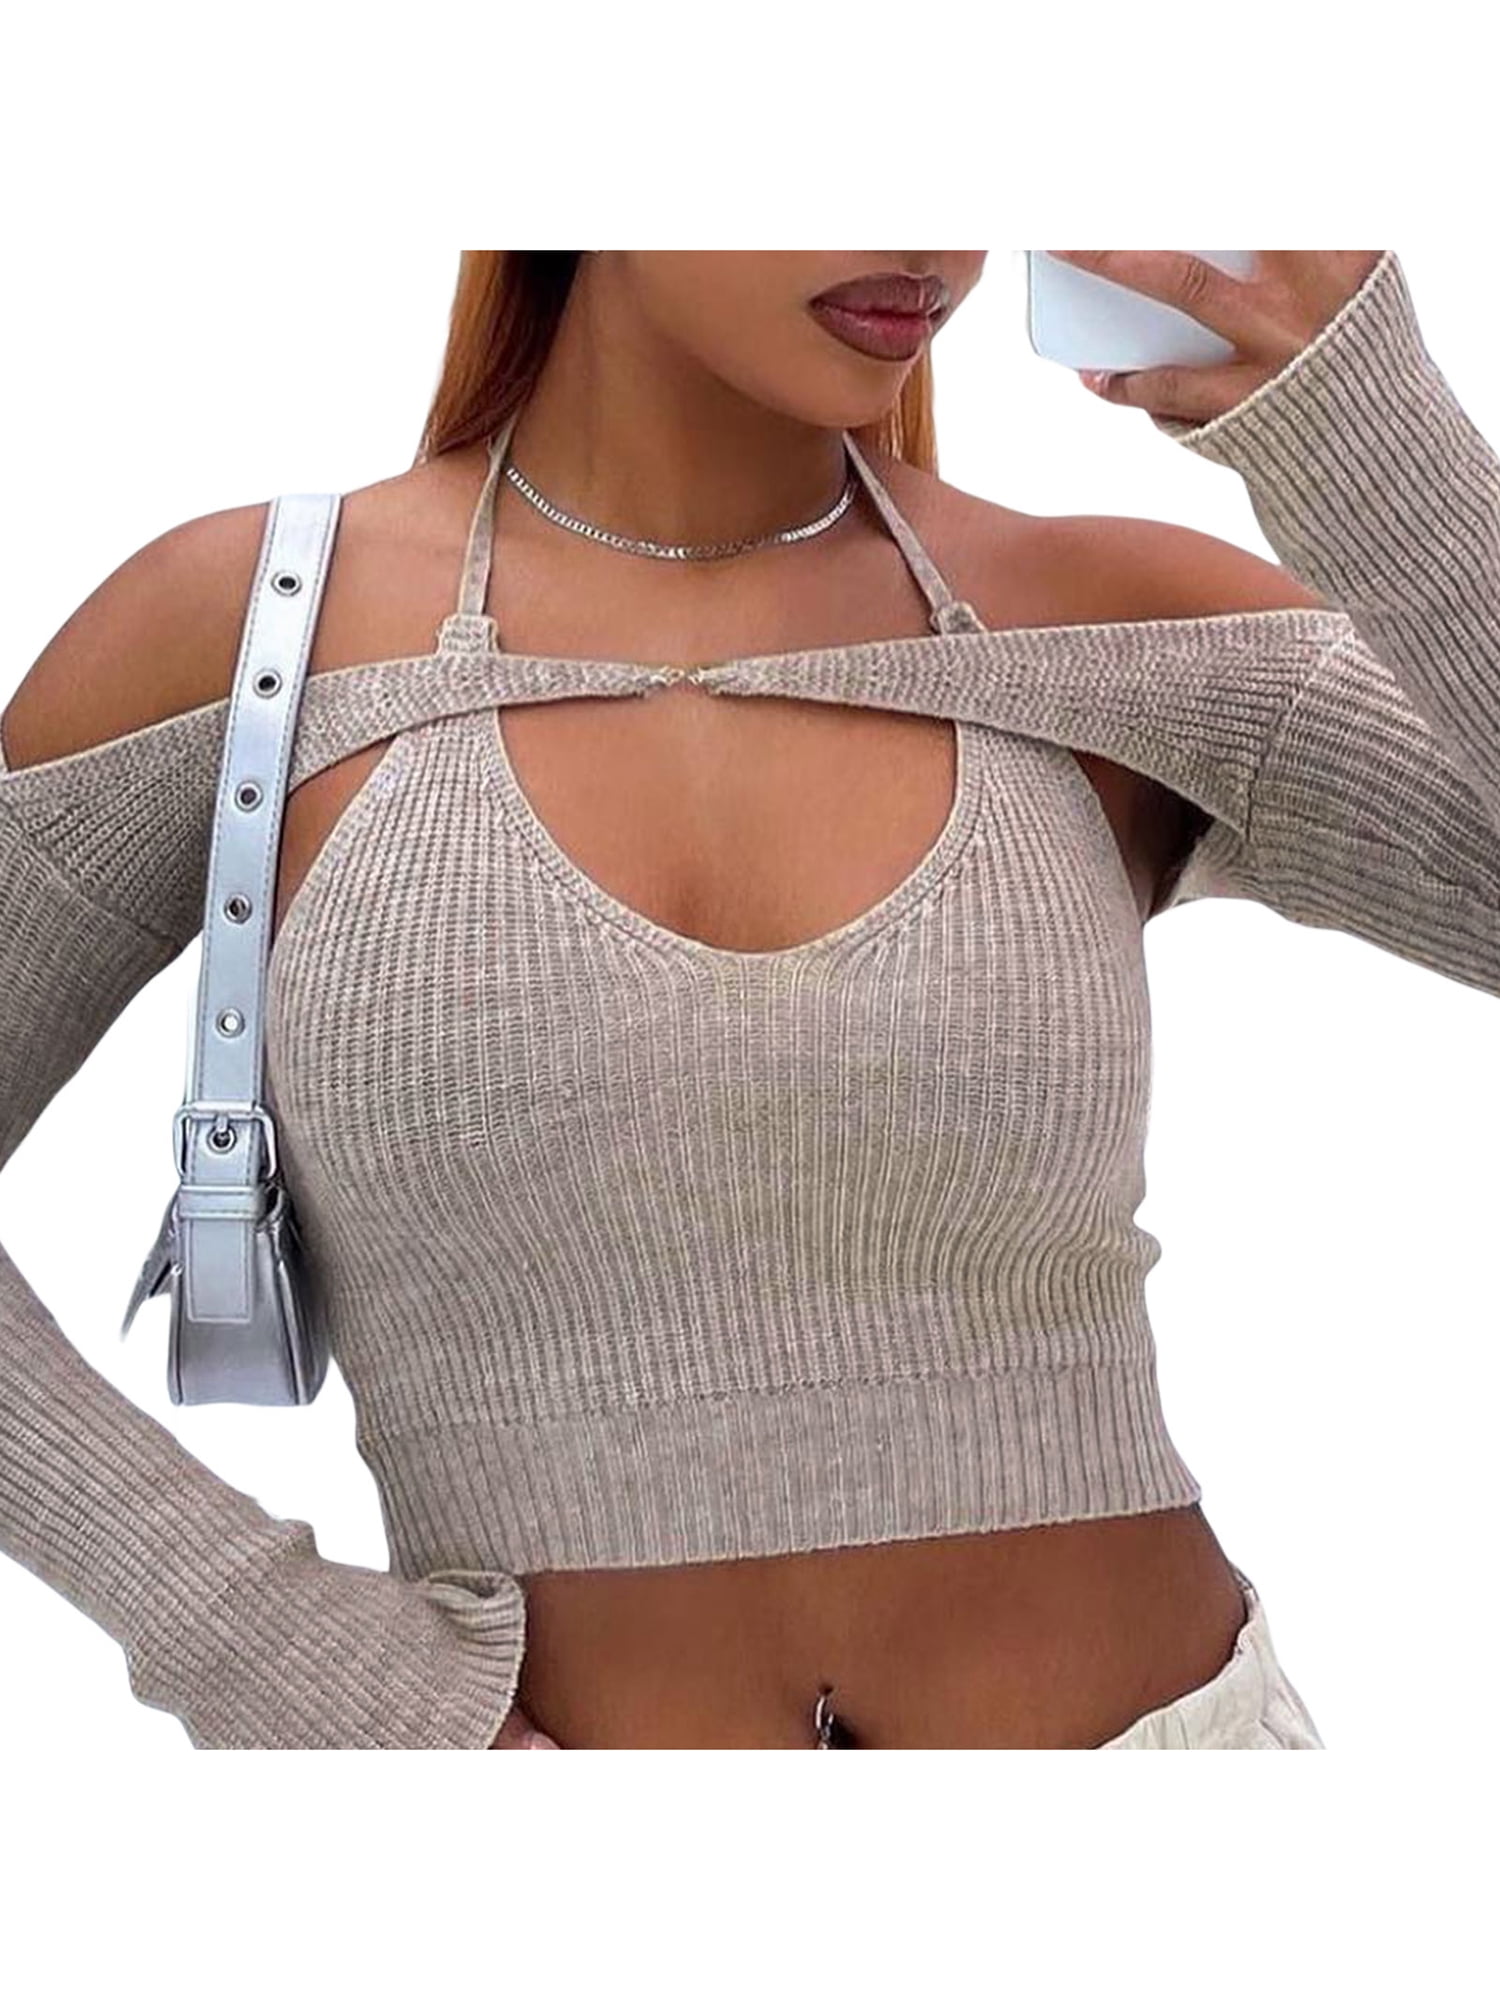 Criss Cross Halter Tops for Women Long Sleeve Cutout Wrap Crop Top Bandage  Cut Out Top Sexy Y2k Tops Clubwear (Apricot, Small) at  Women's  Clothing store